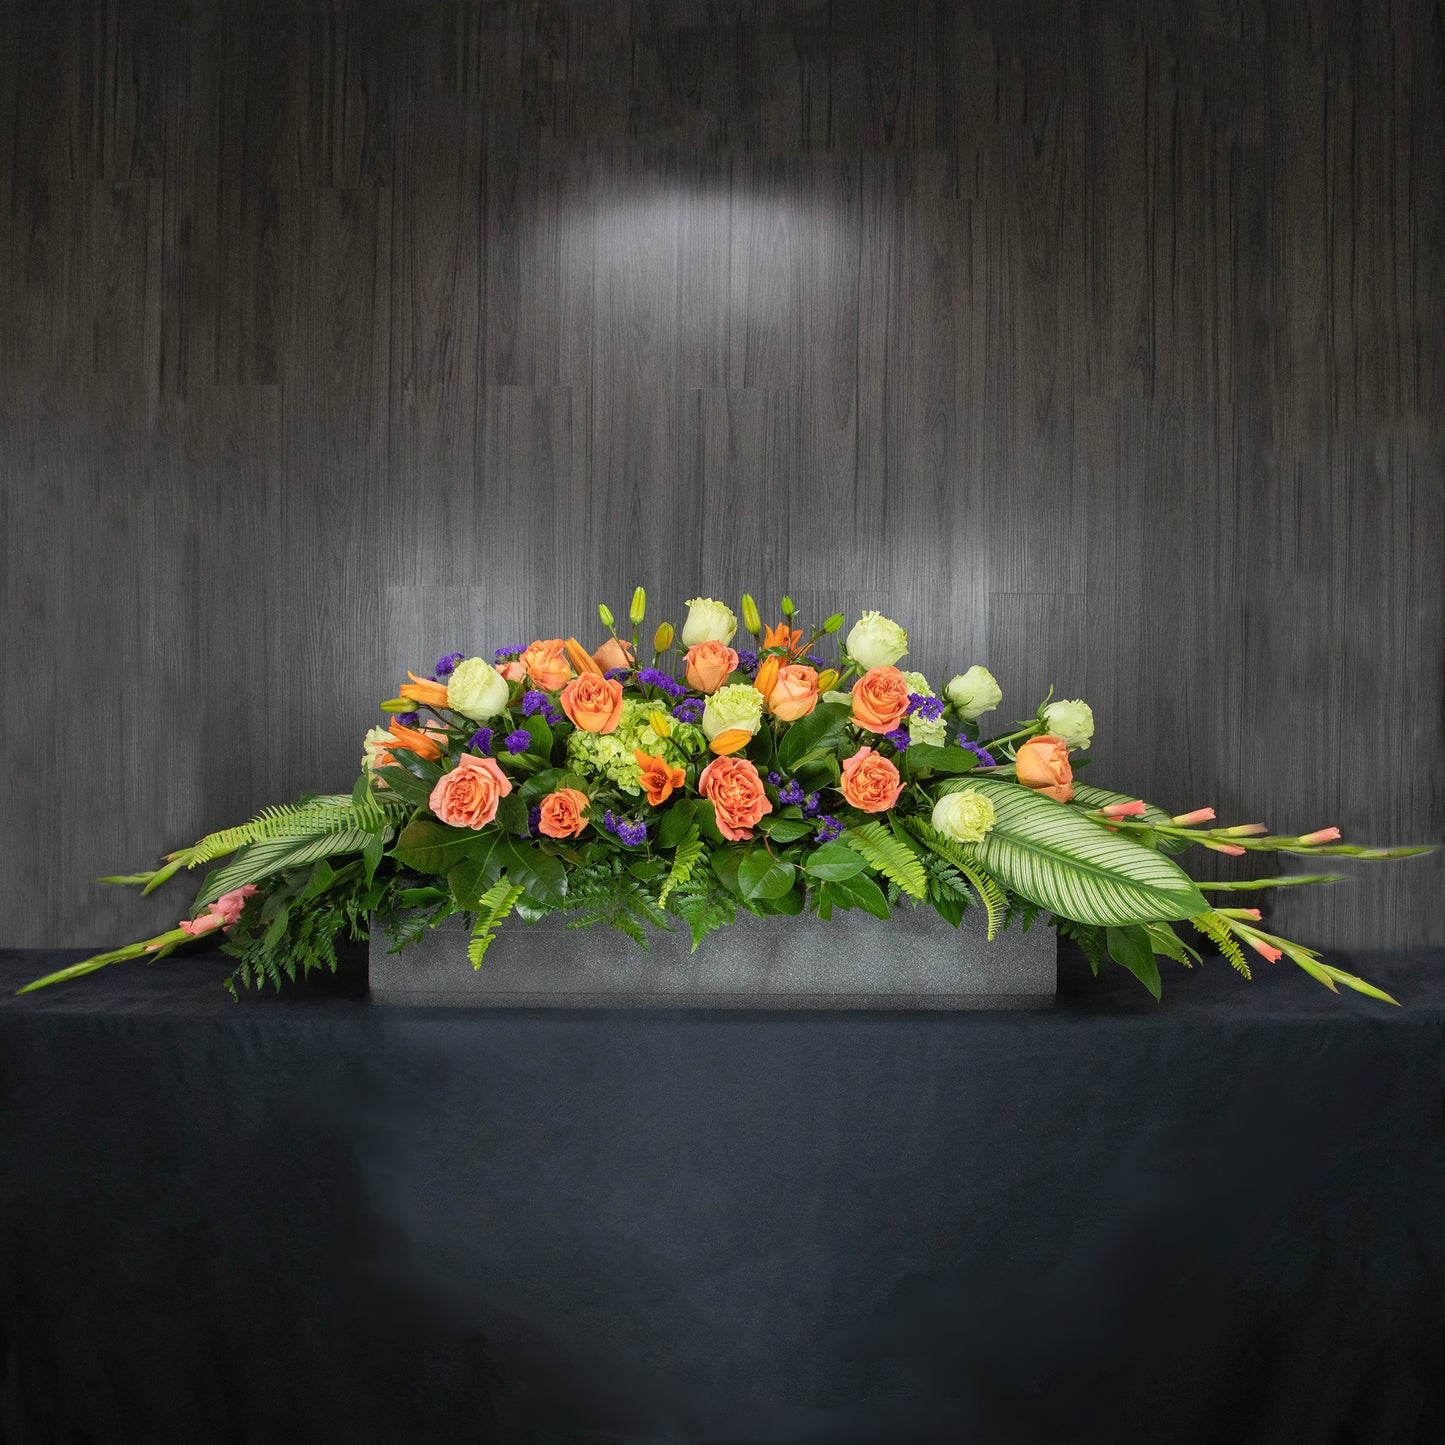 a full casket spray made with orange, green, white, and purple flowers